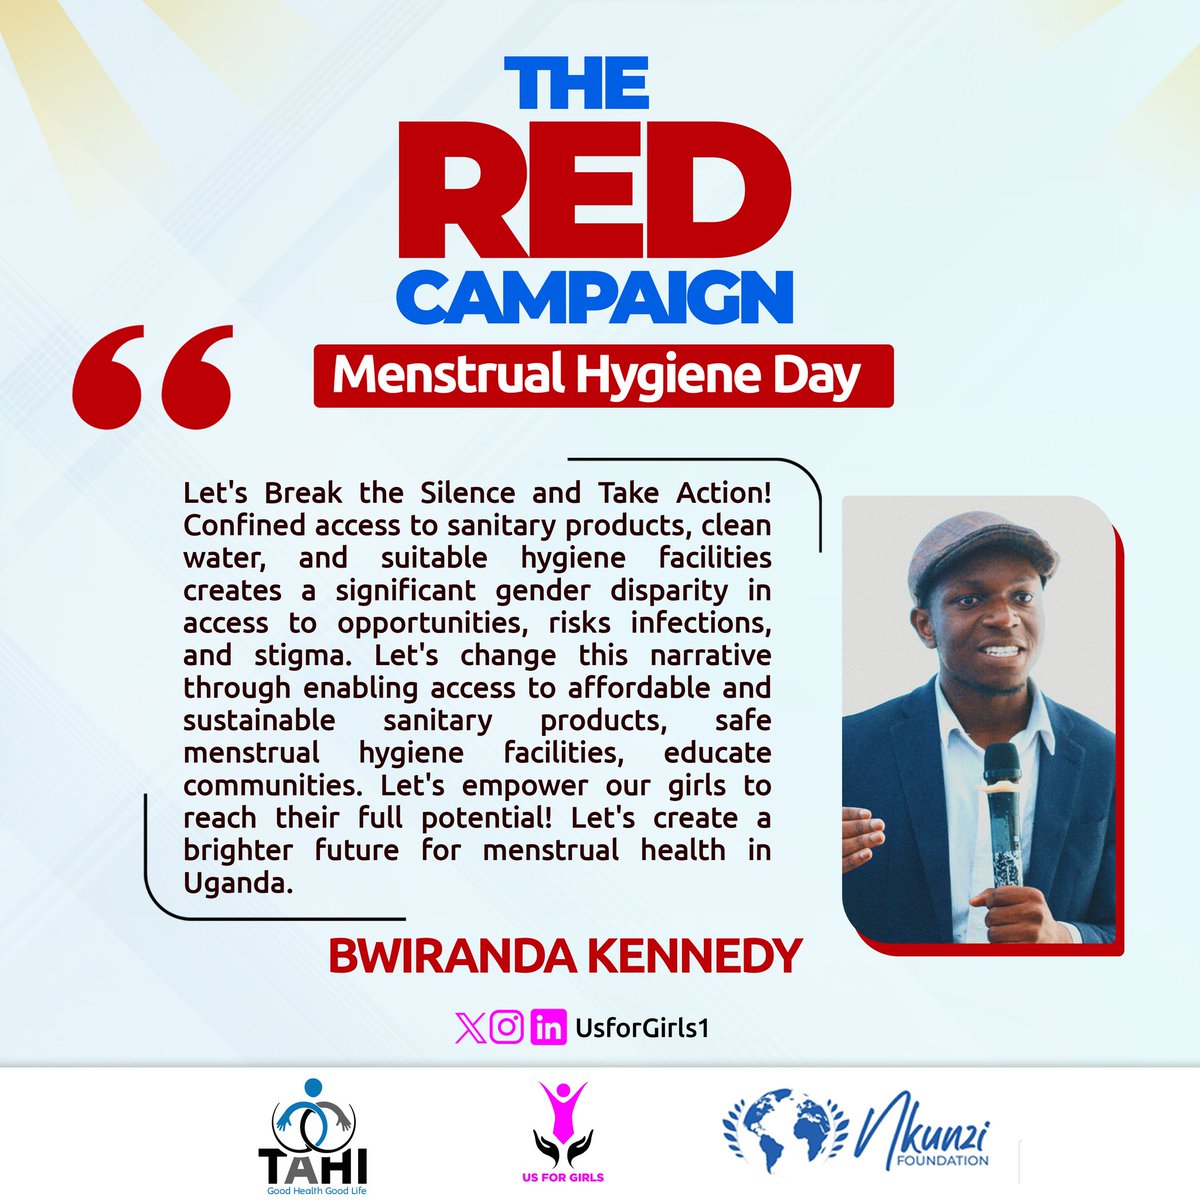 #RedCampaign

We agree with @BwirandaKen
Period poverty creates a gender disparity in girl's access to opportunities, risks infections and increases school dropout.

Let us BREAK THE SILENCE and TAKE ACTION!
Let us help our girls reach their fullest potential.

#EndPeriodPoverty